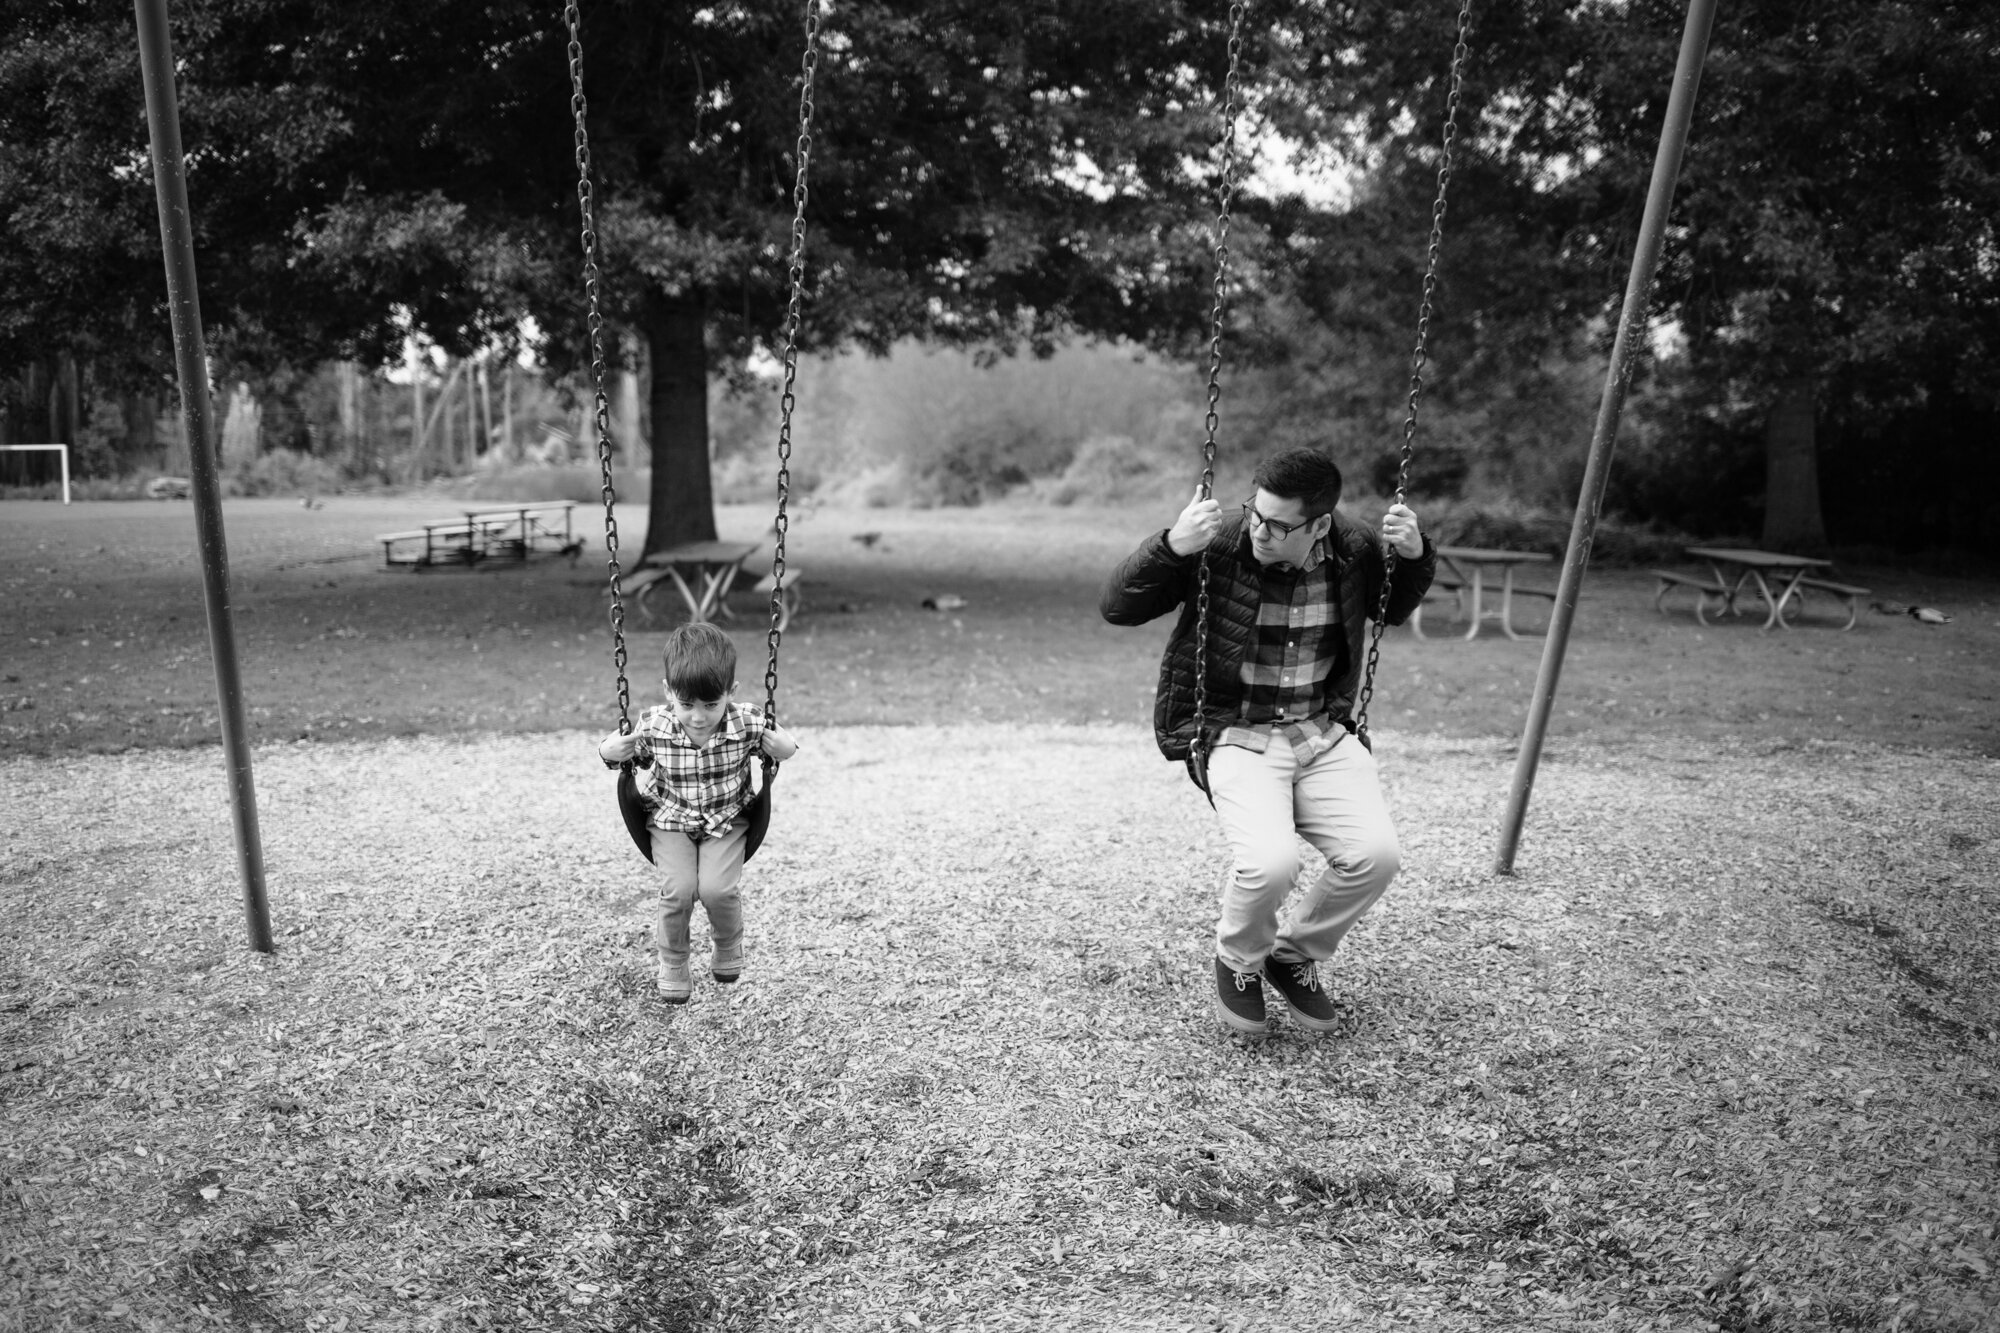 Father and son on swing set